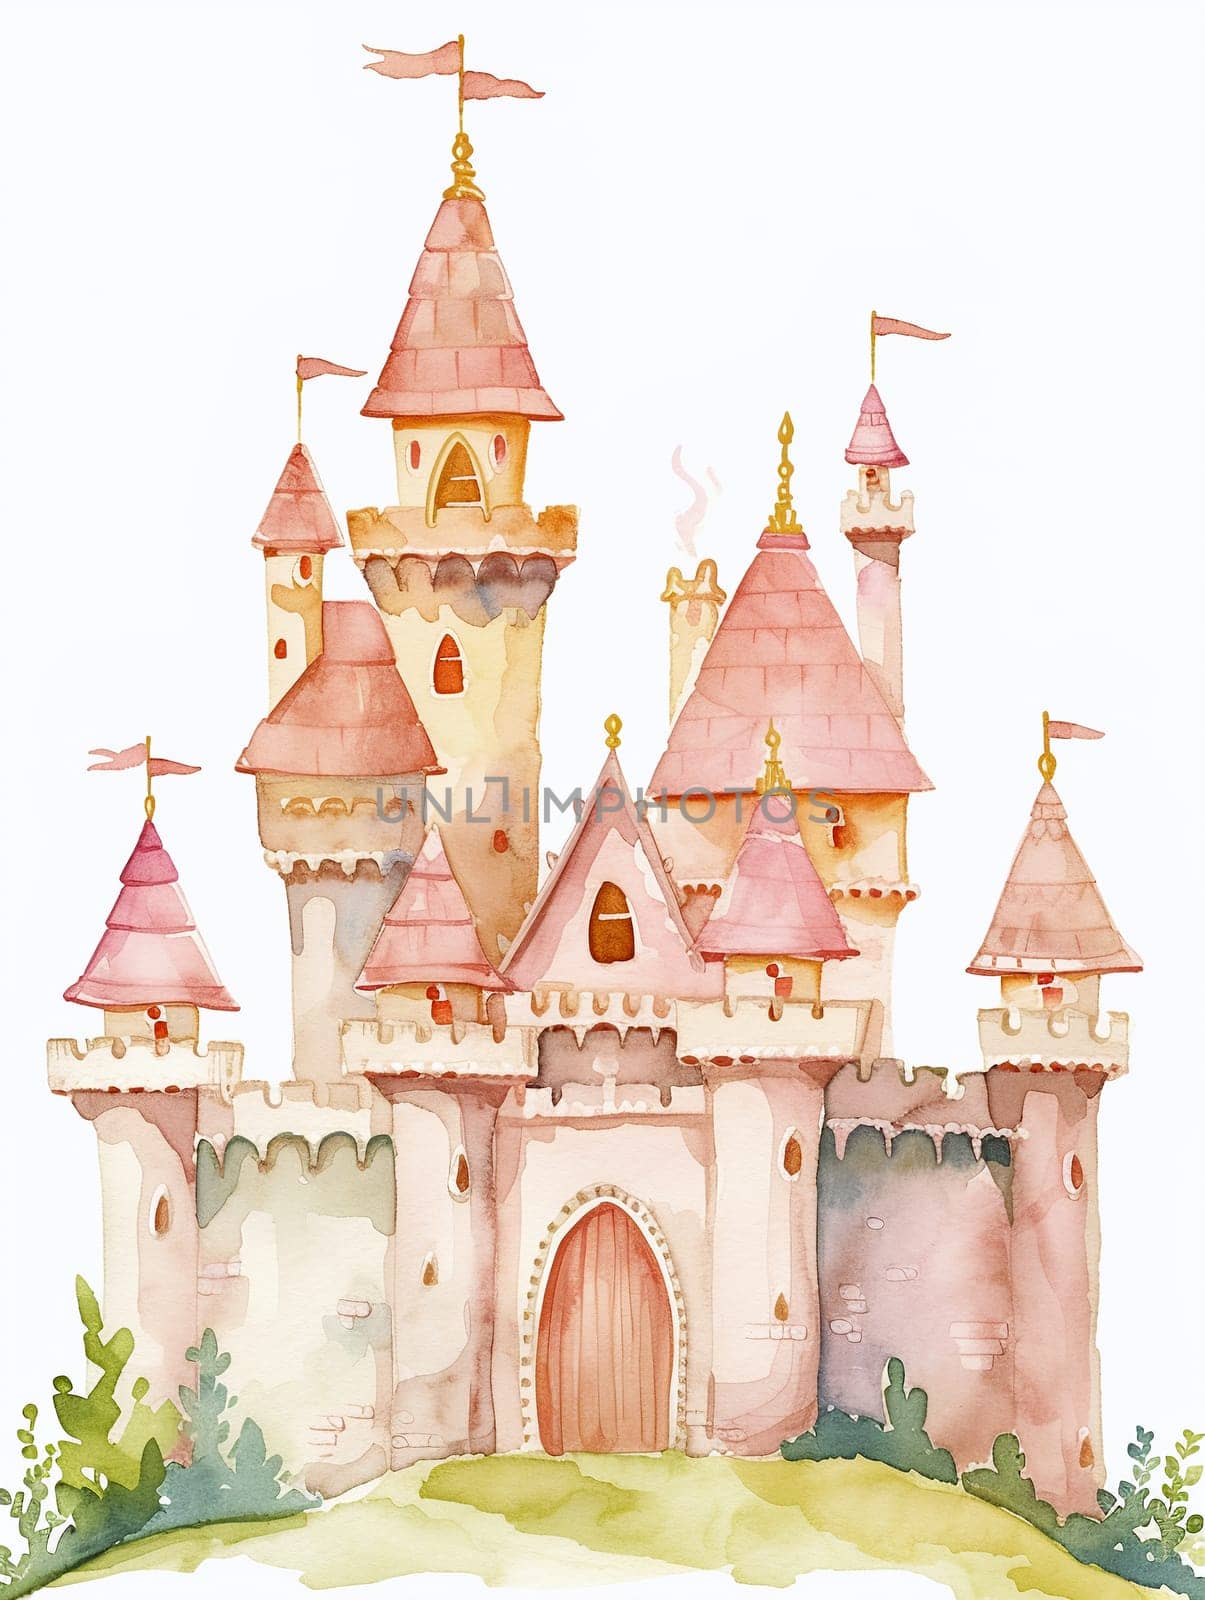 A detailed watercolor depiction of a castle featuring prominent turrets and architectural details.